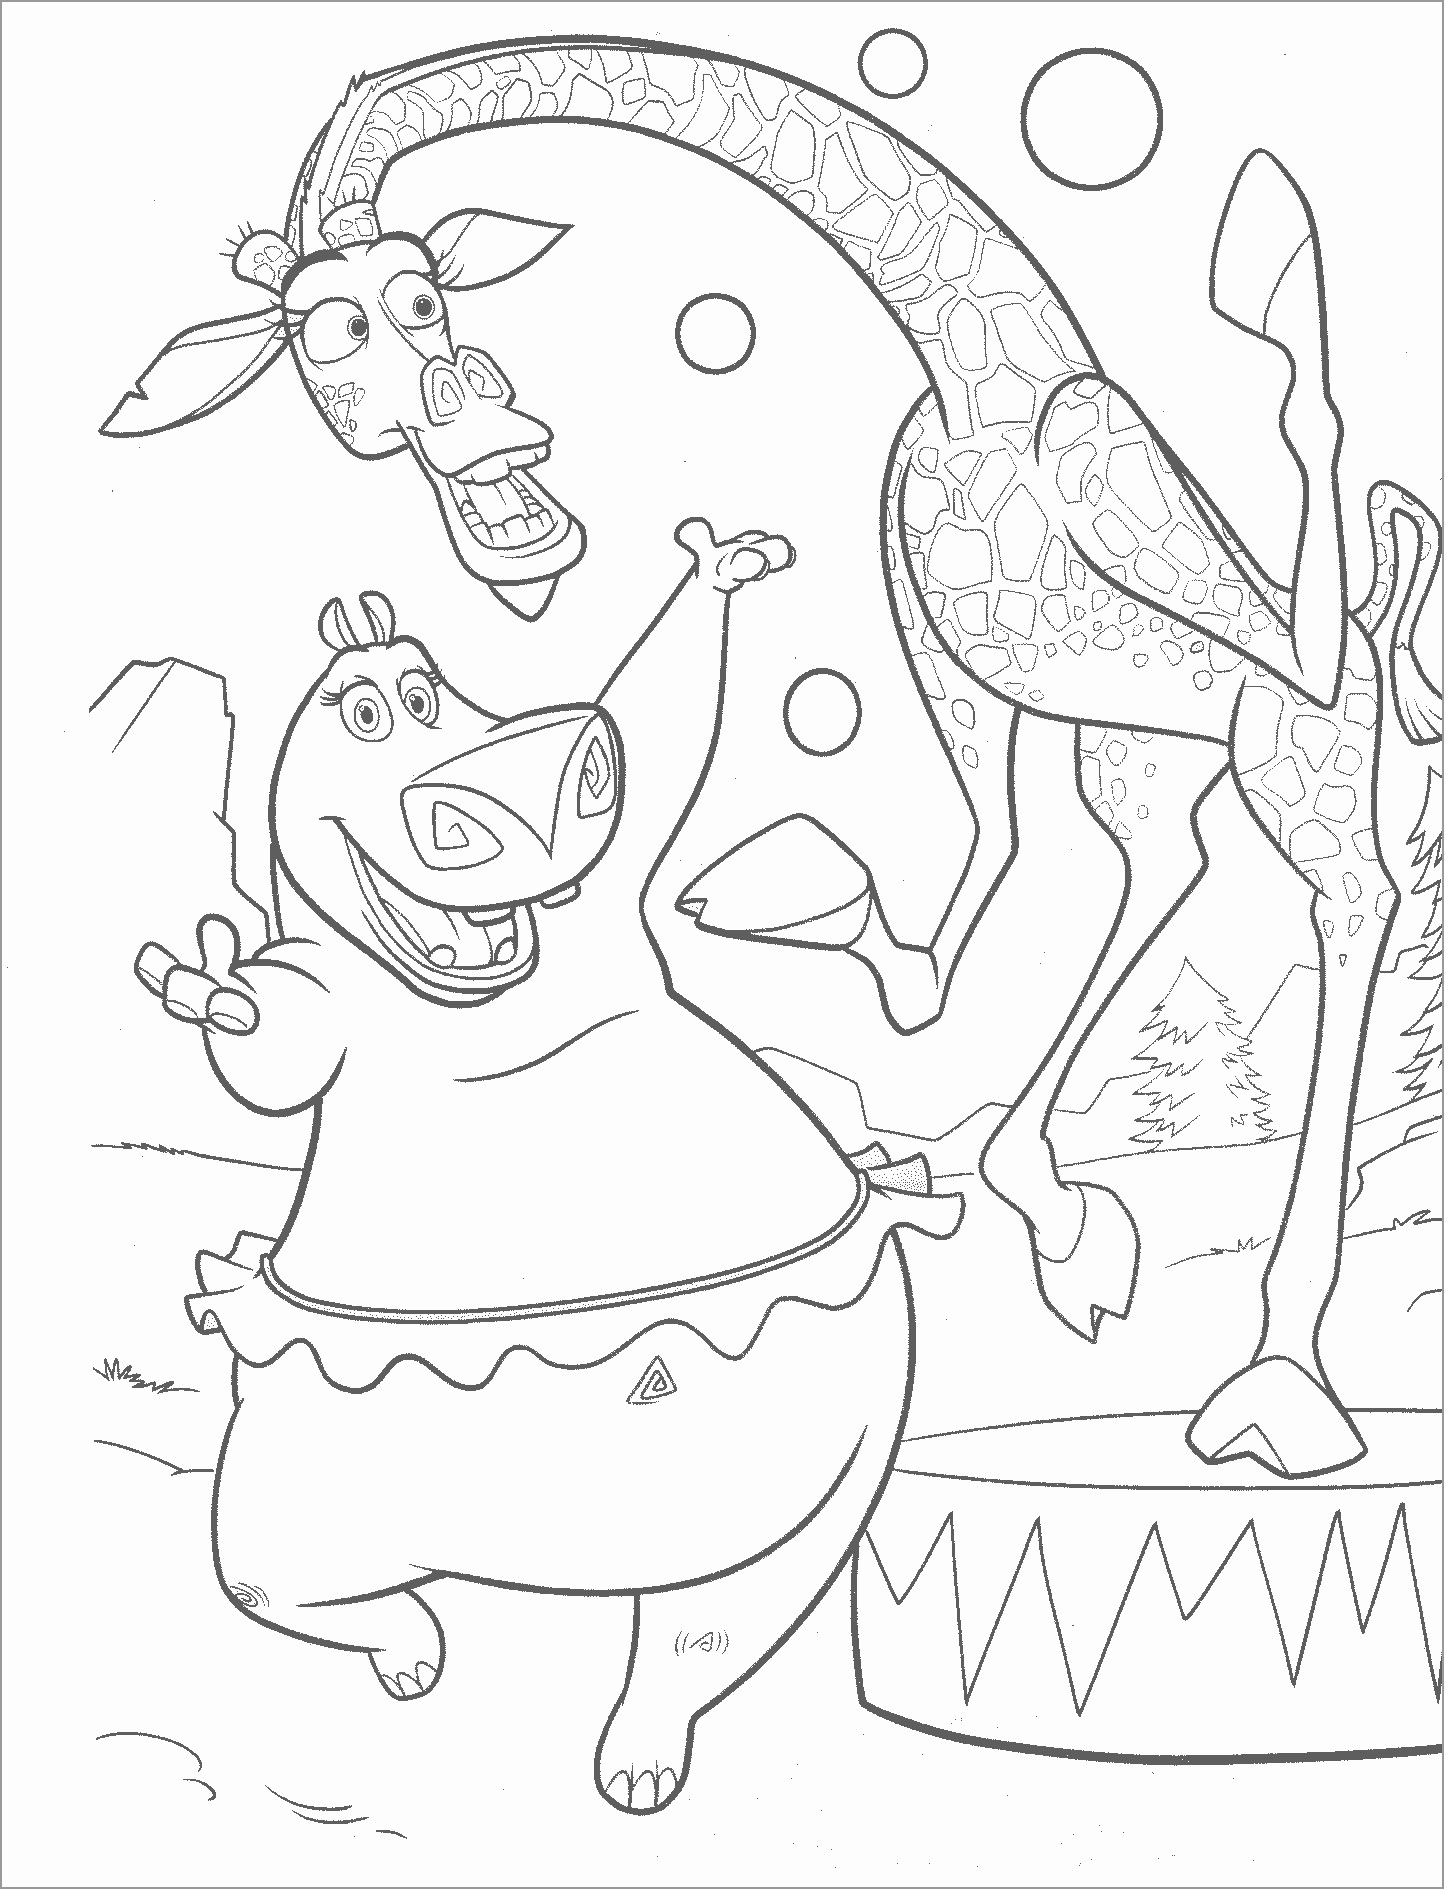 Funny Madagascar Animals Coloring Page